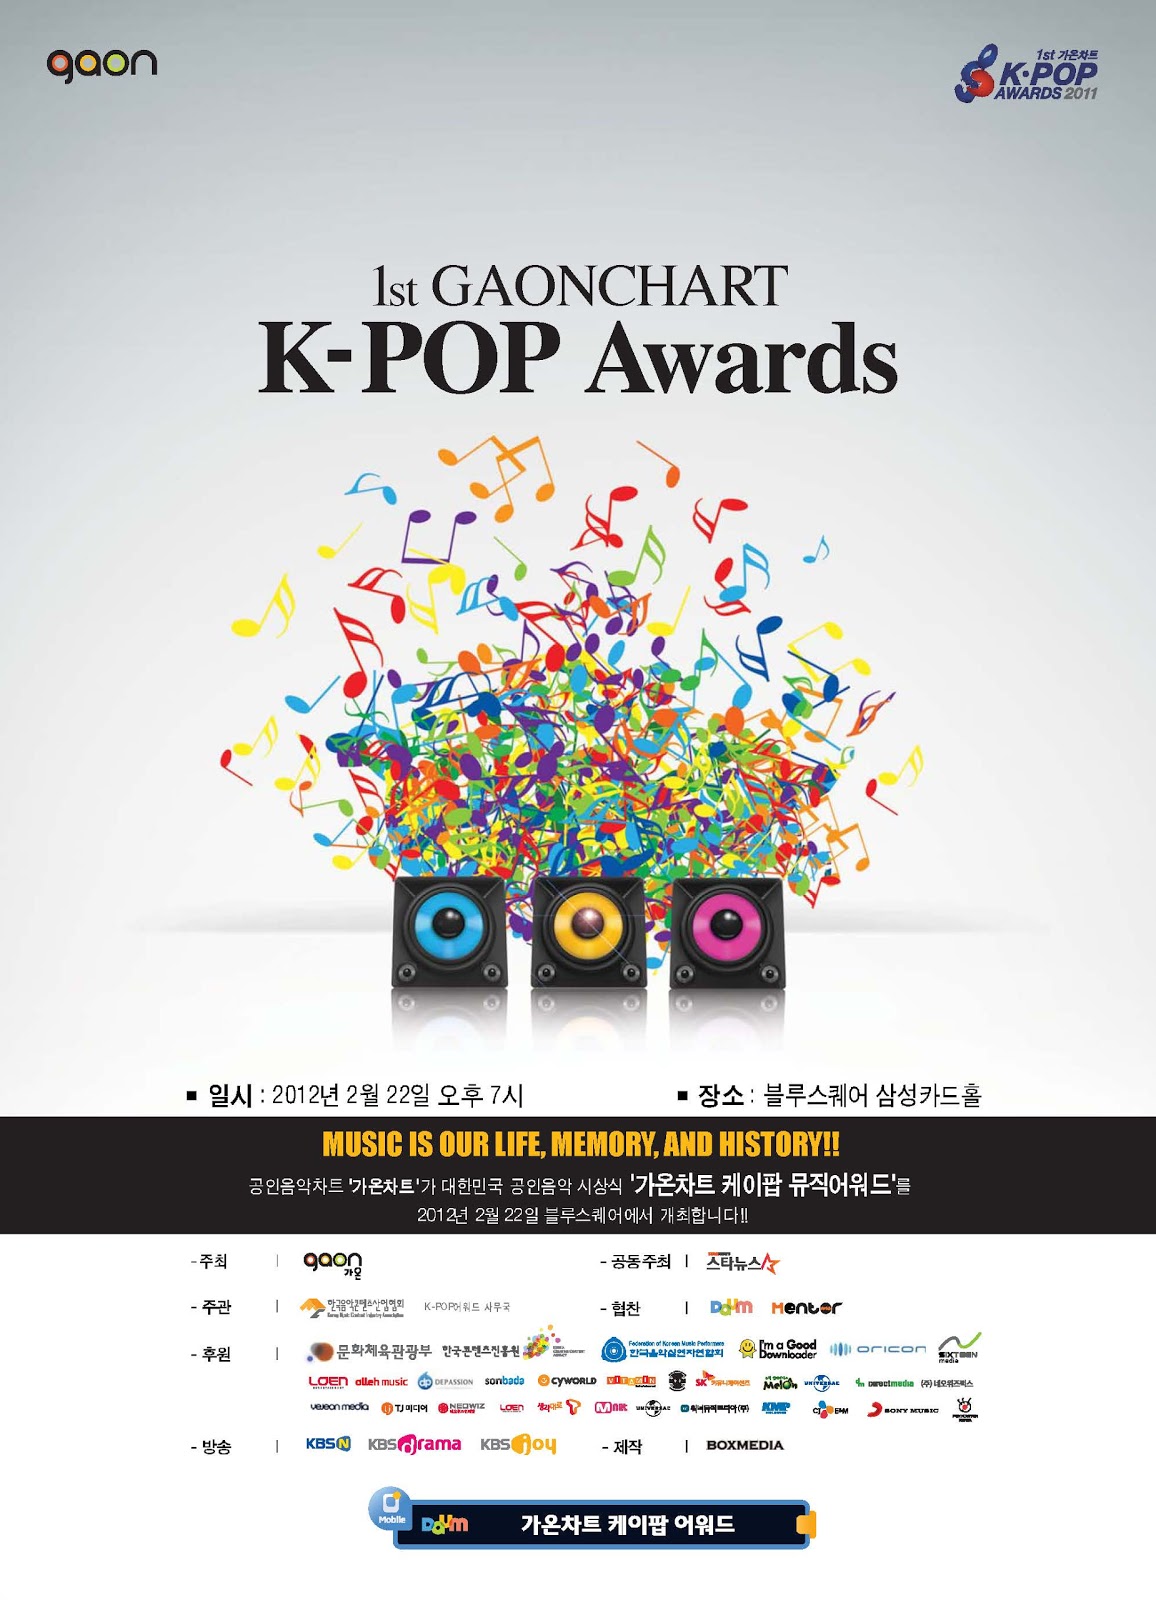 [News] Gaon launches official website for "1st Gaon Chart Kpop Awards